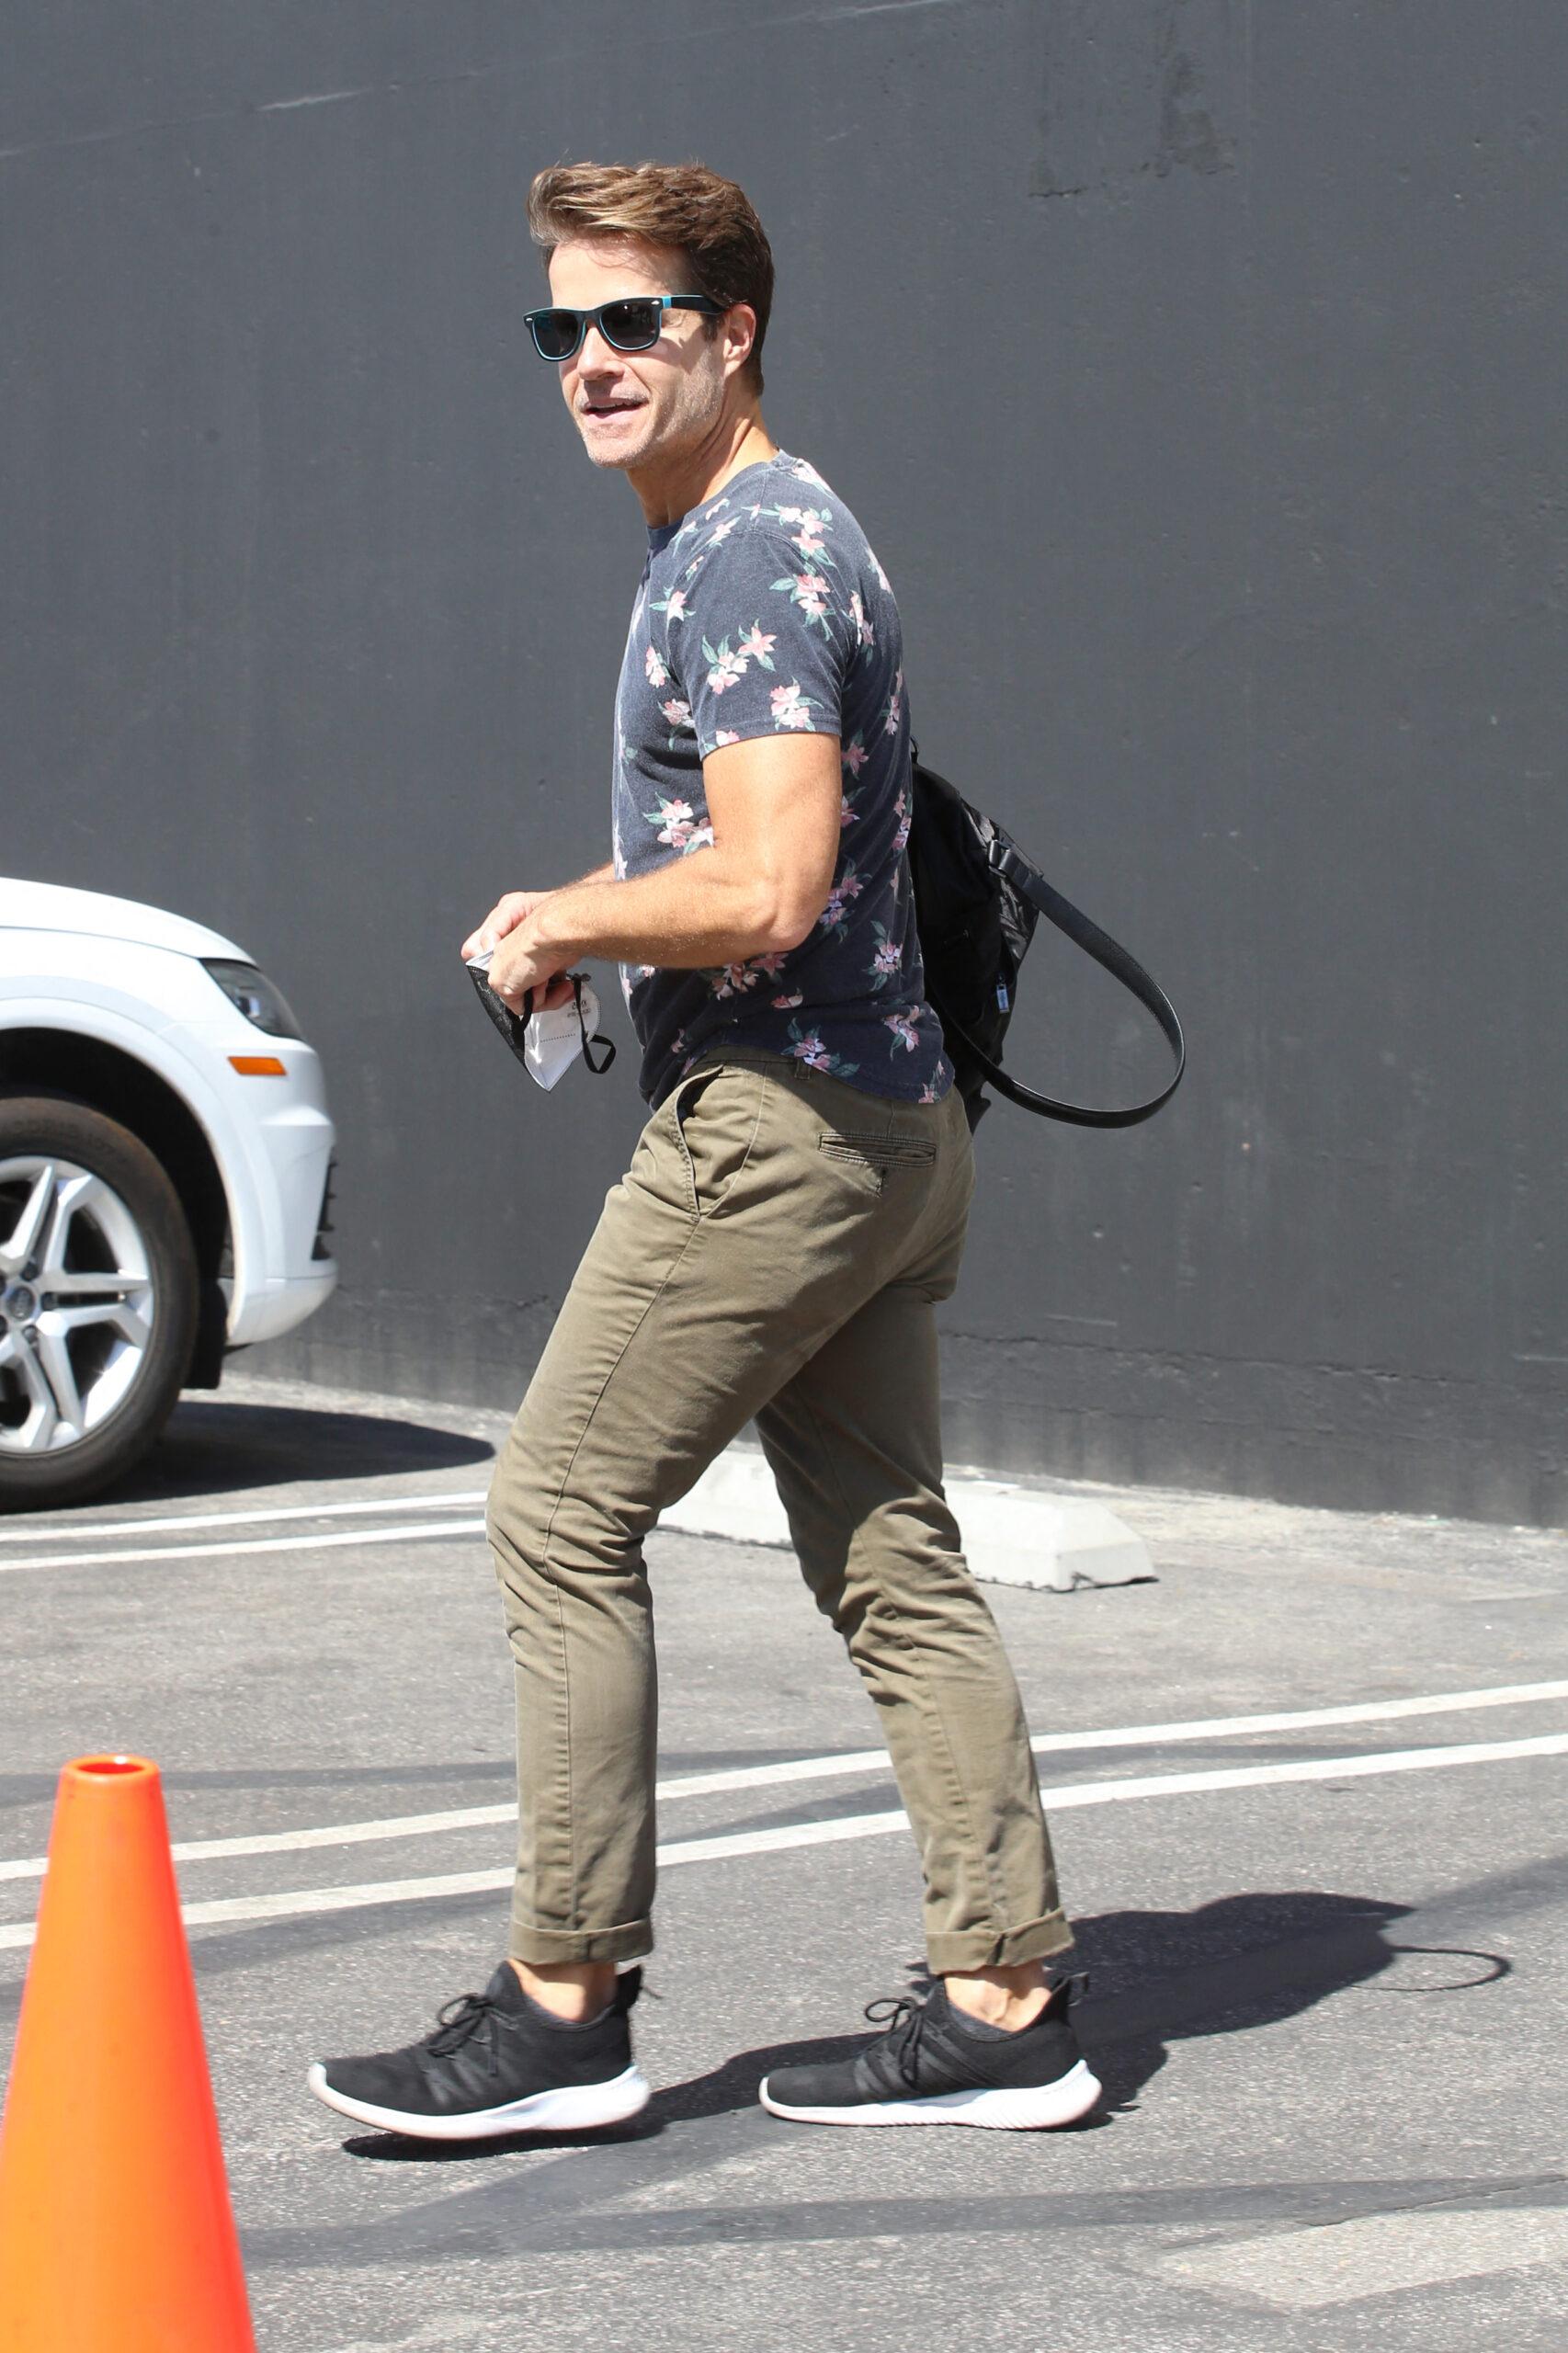 DWTS pros head into the dance studio on Wednesday